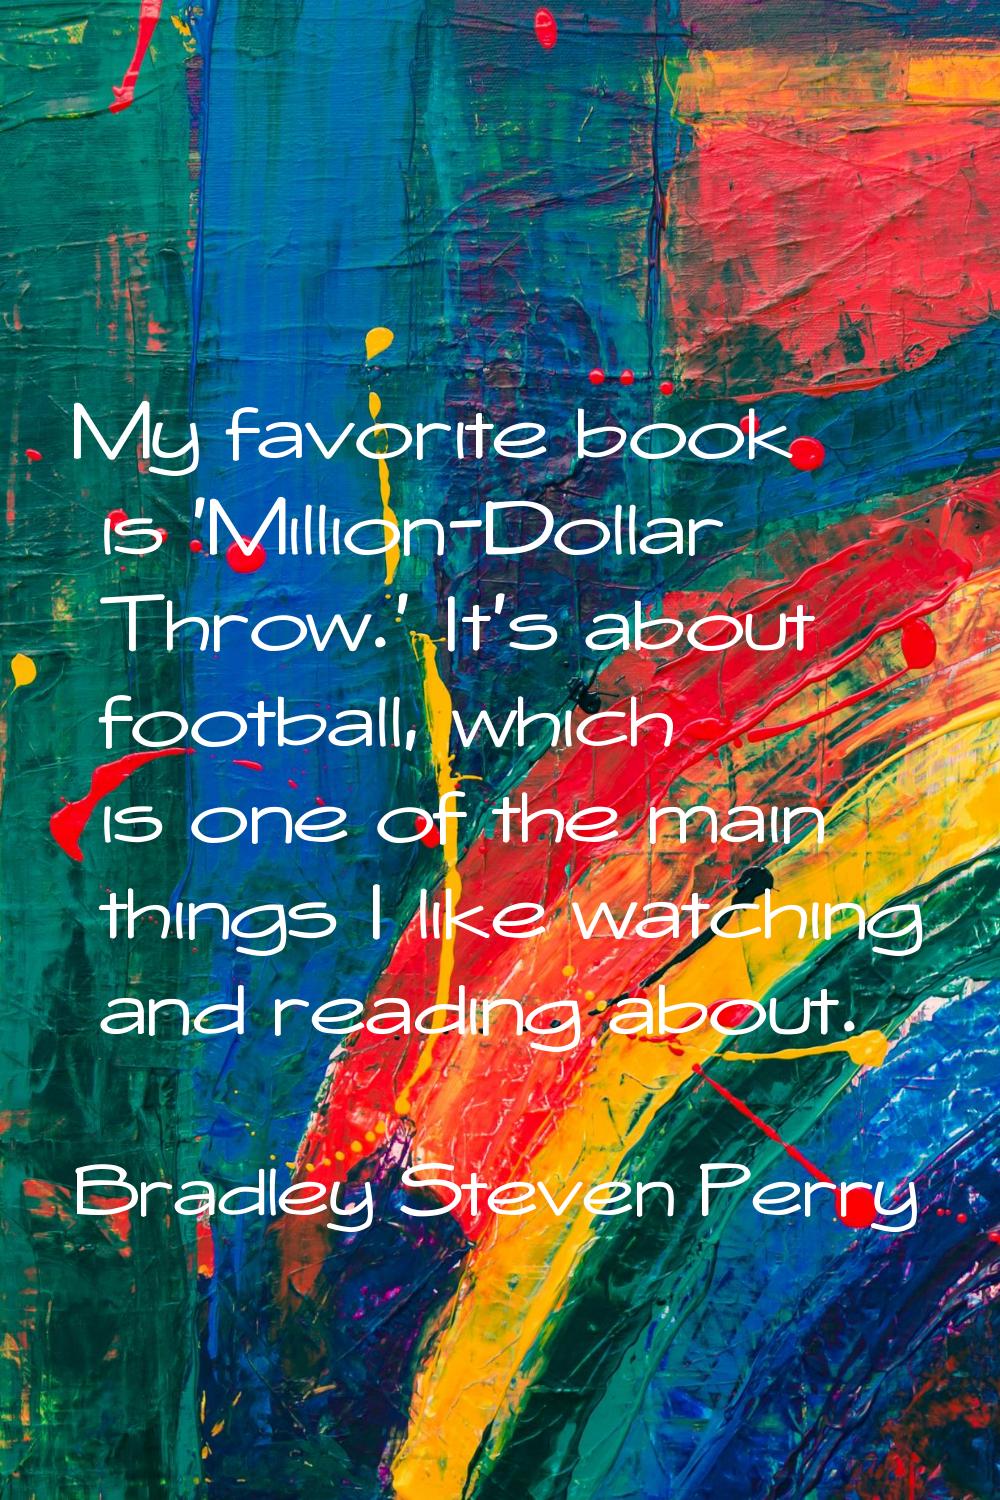 My favorite book is 'Million-Dollar Throw.' It's about football, which is one of the main things I 